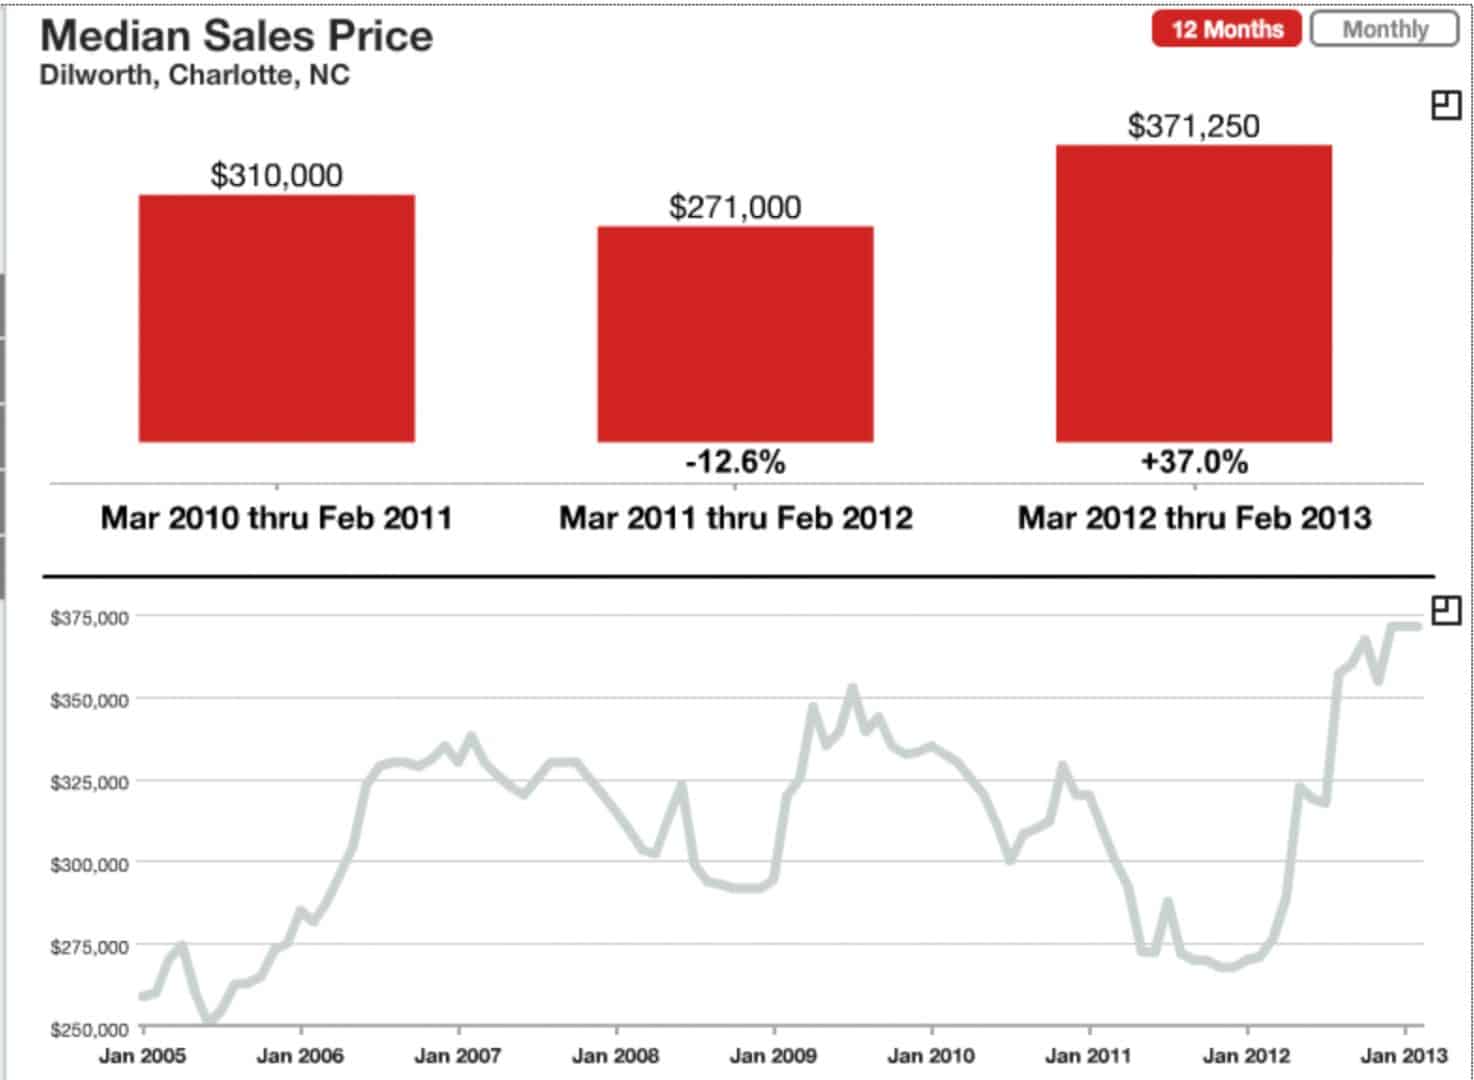 Dilworth Charlotte NC median sales prices year-over-year